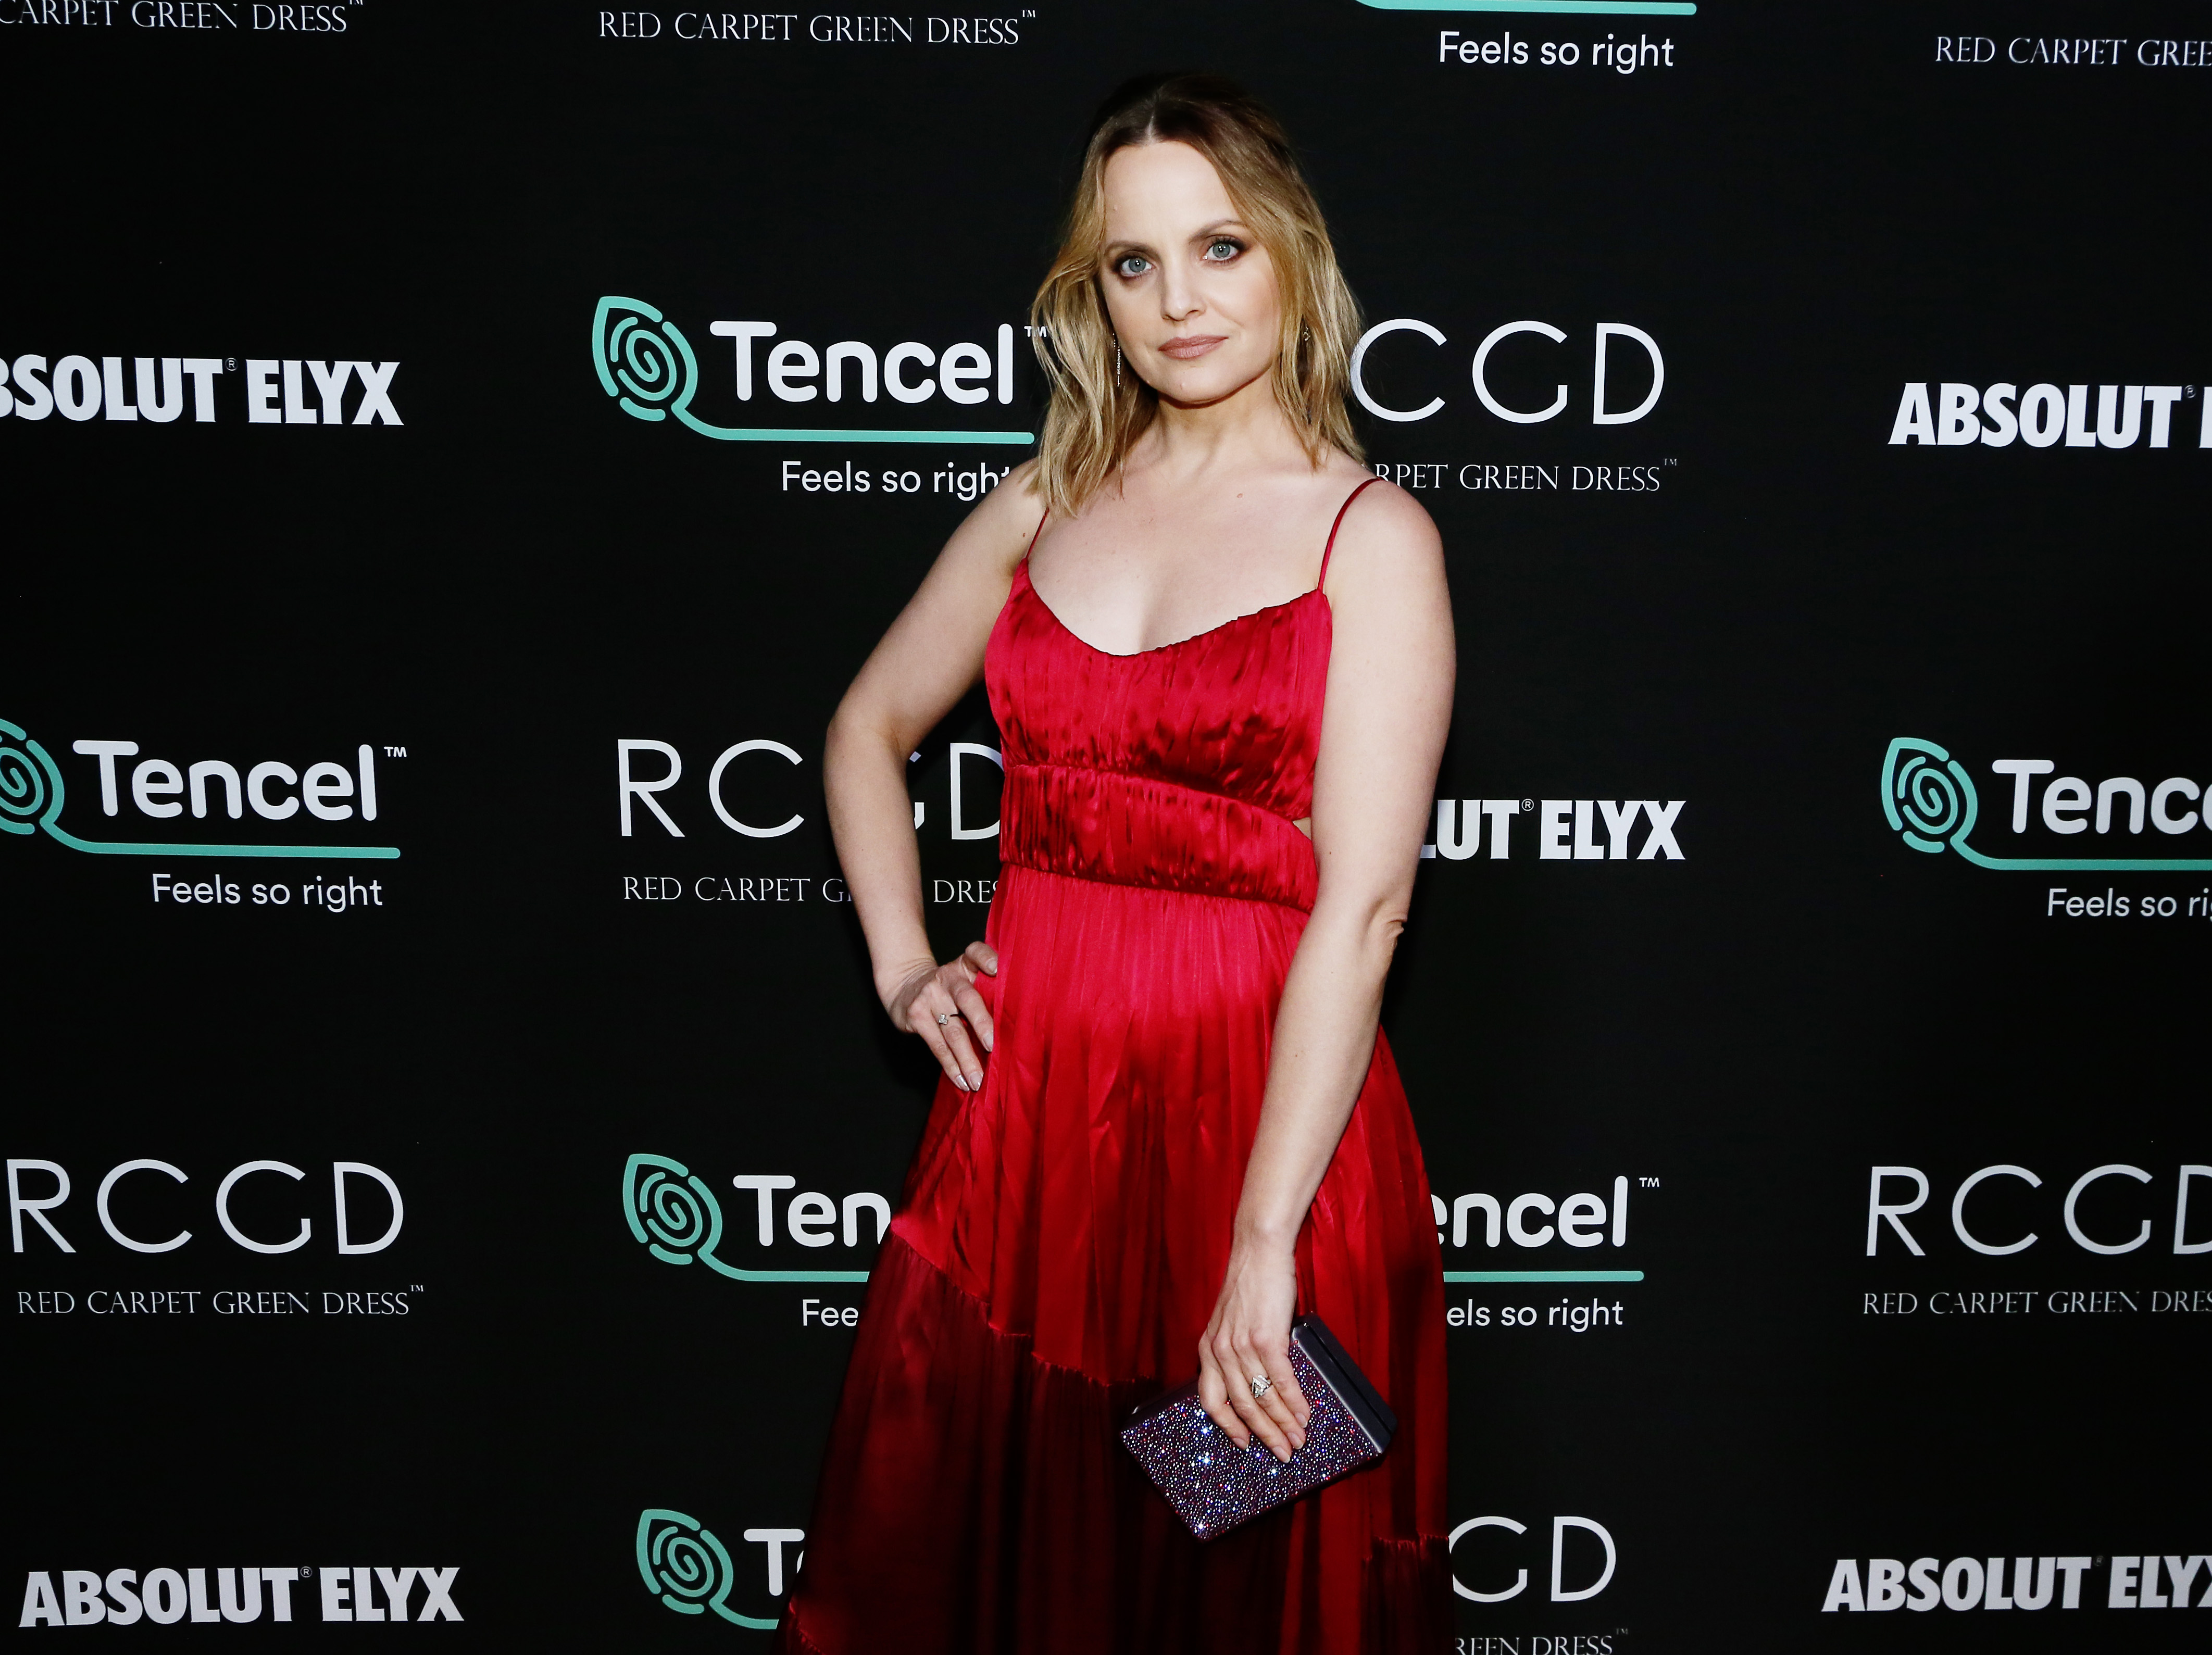 Mena Suvari attends Red Carpet Green Dress at the Private Residence of Jonas Tahlin, CEO of Absolut Elyx